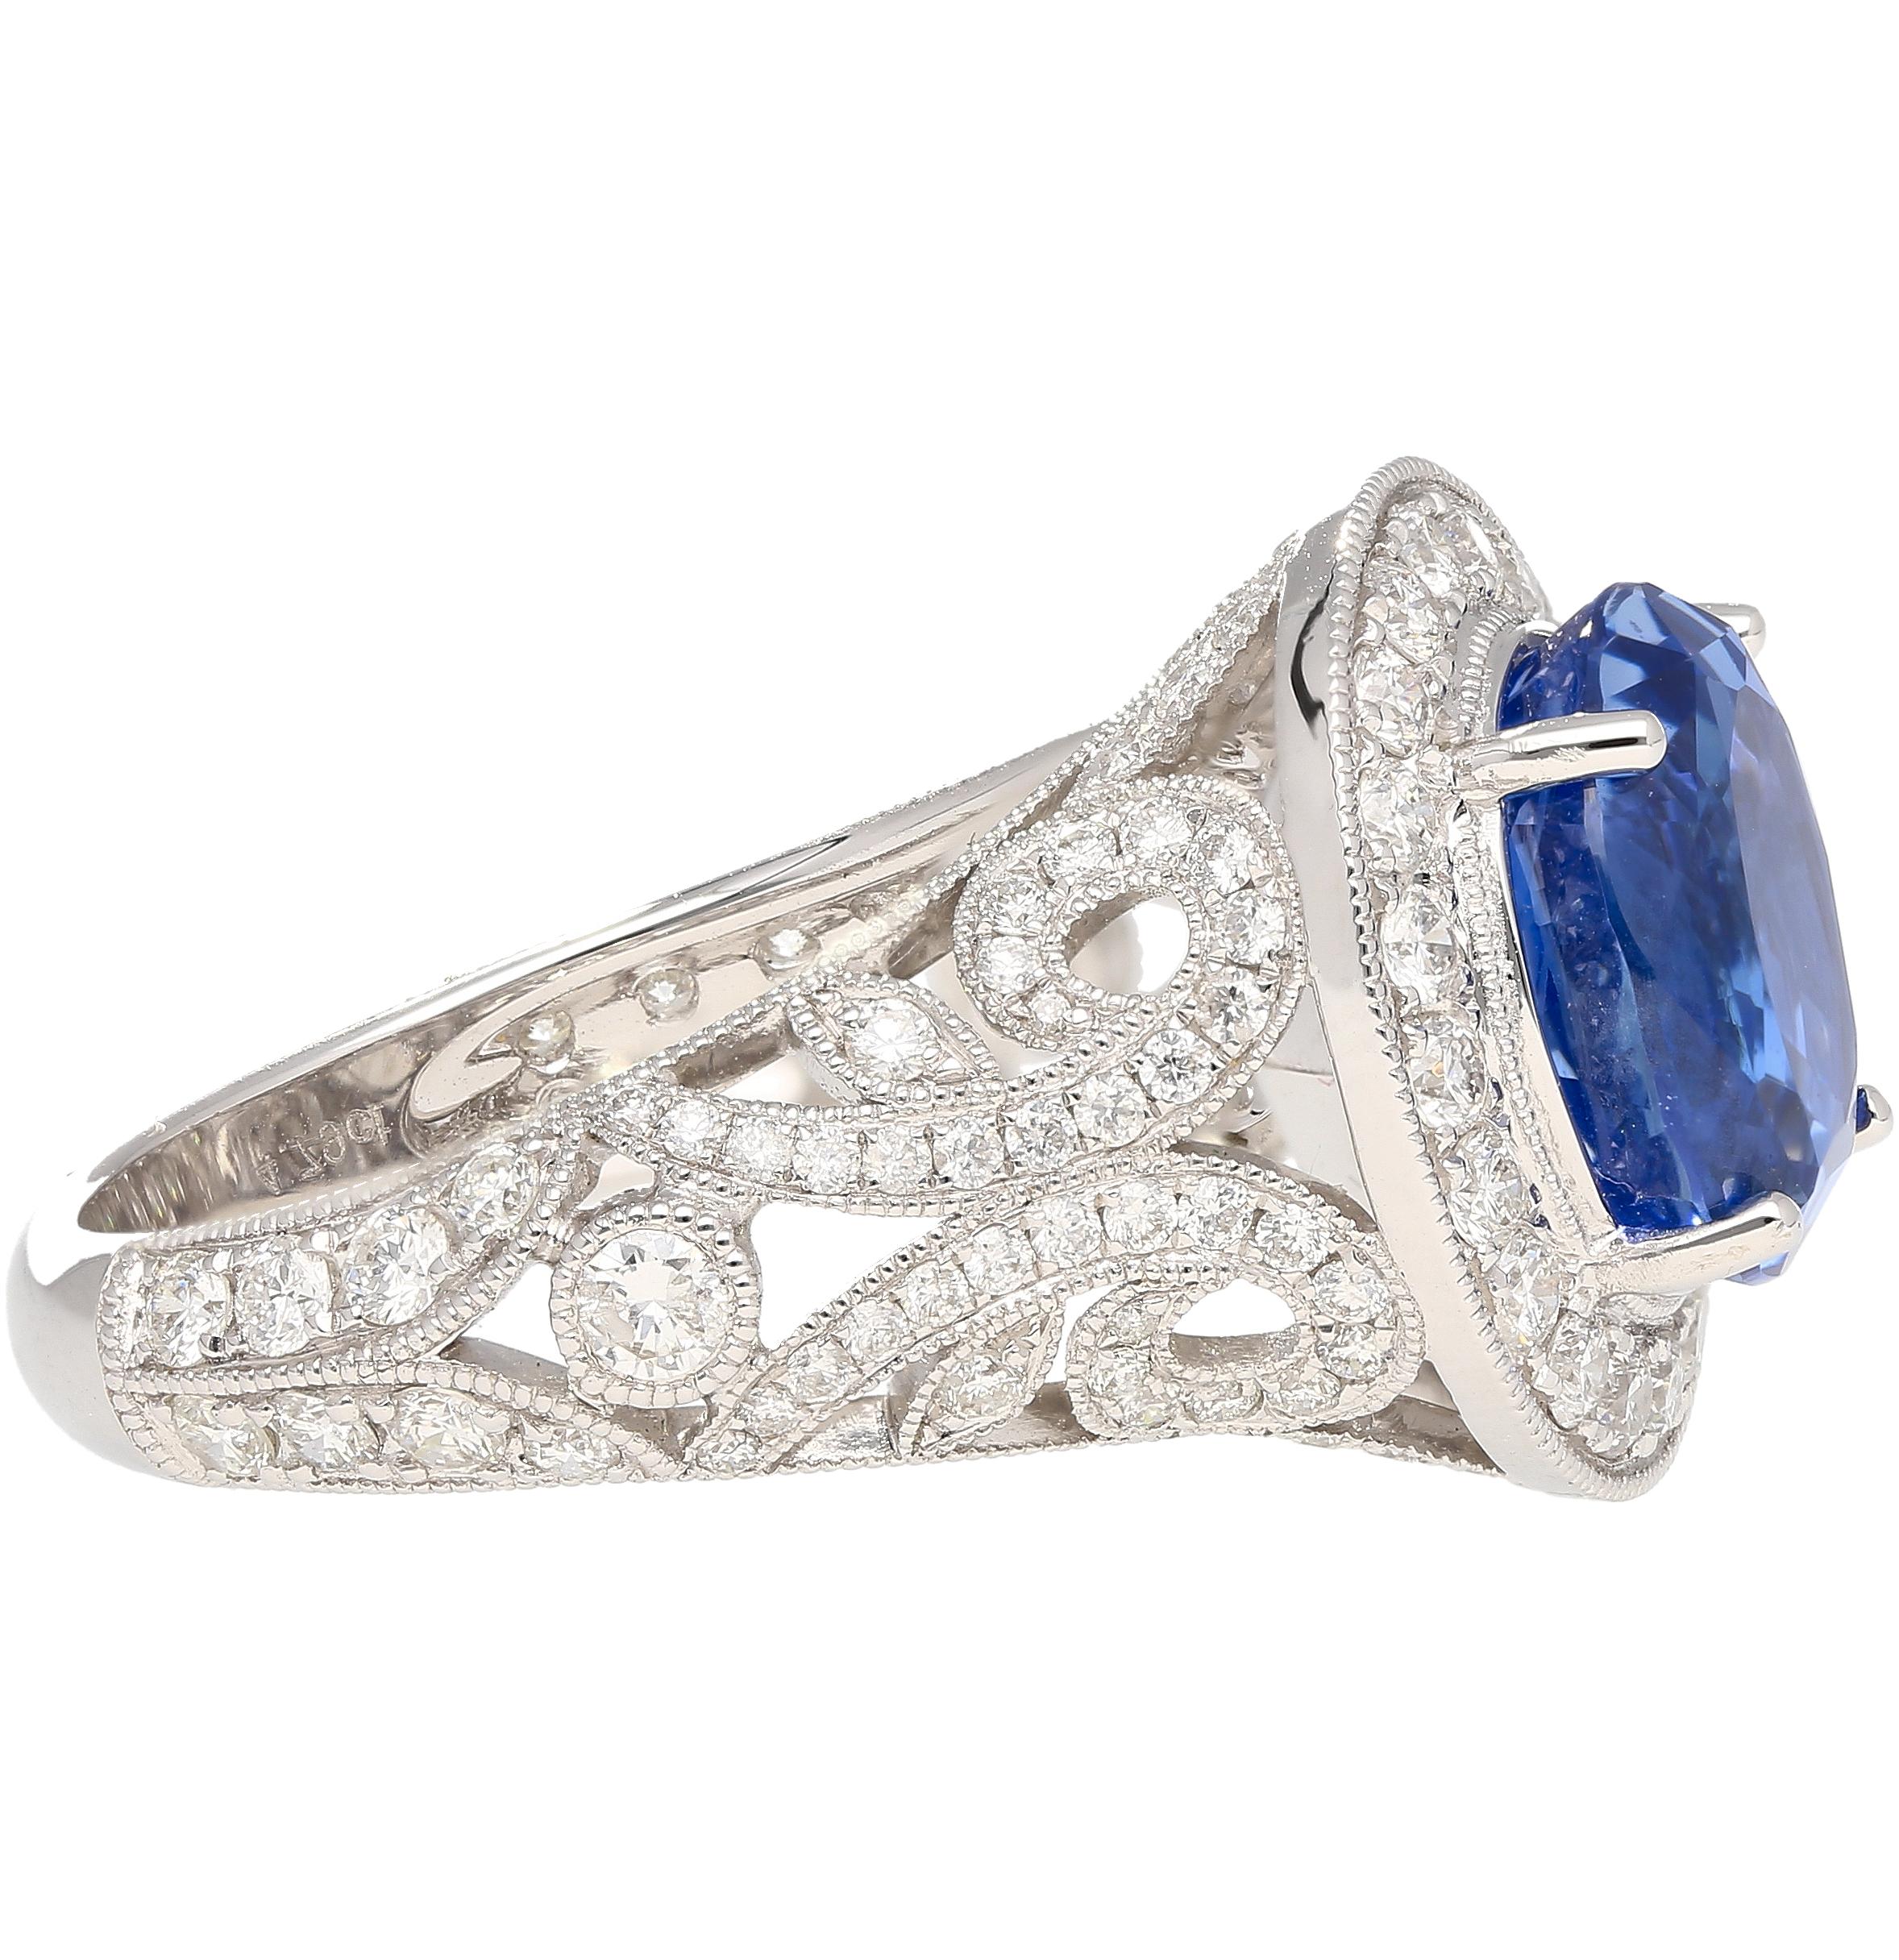 Contemporary No Heat 4.84 Carat Violet-Blue Ceylon Sapphire with Diamonds in 18K Gold Ring For Sale